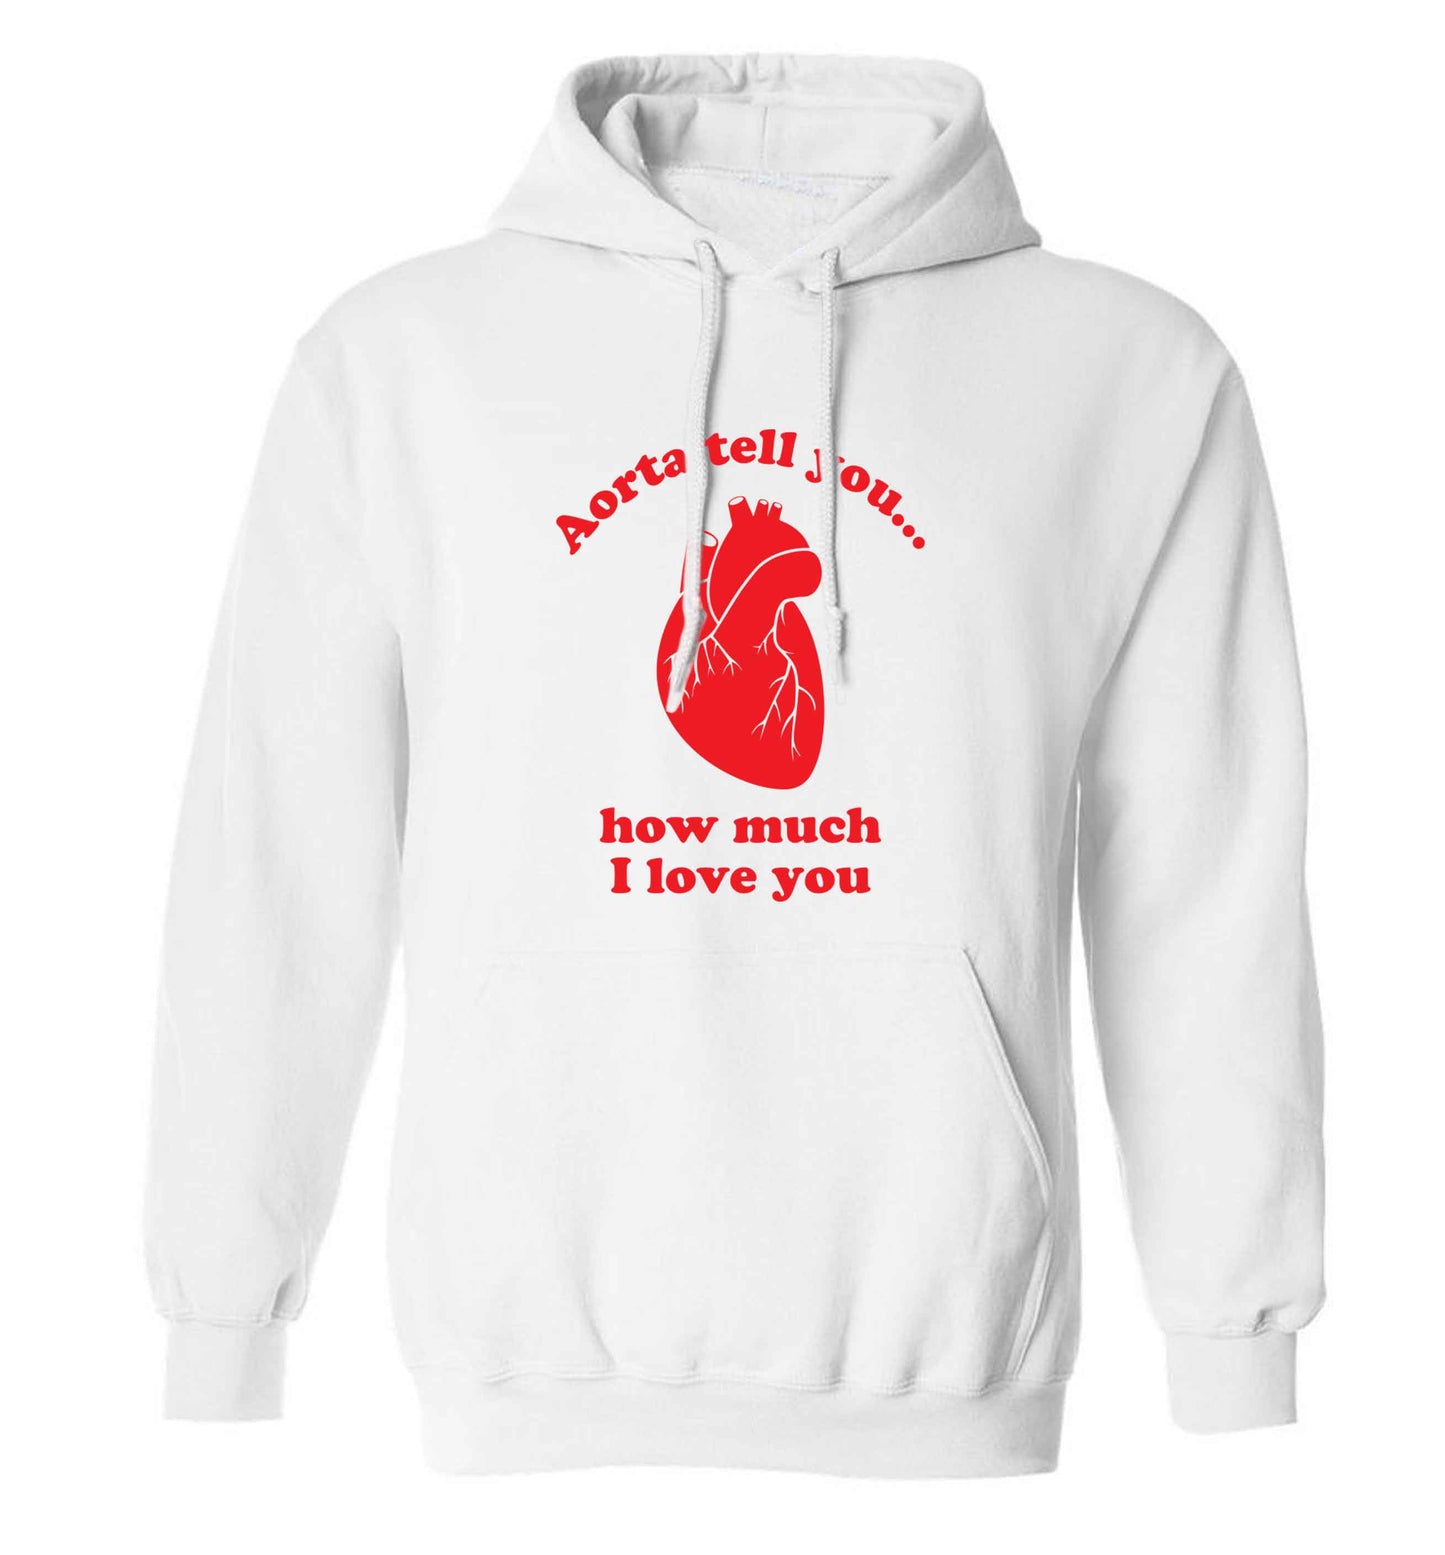 Aorta tell you how much I love you adults unisex white hoodie 2XL